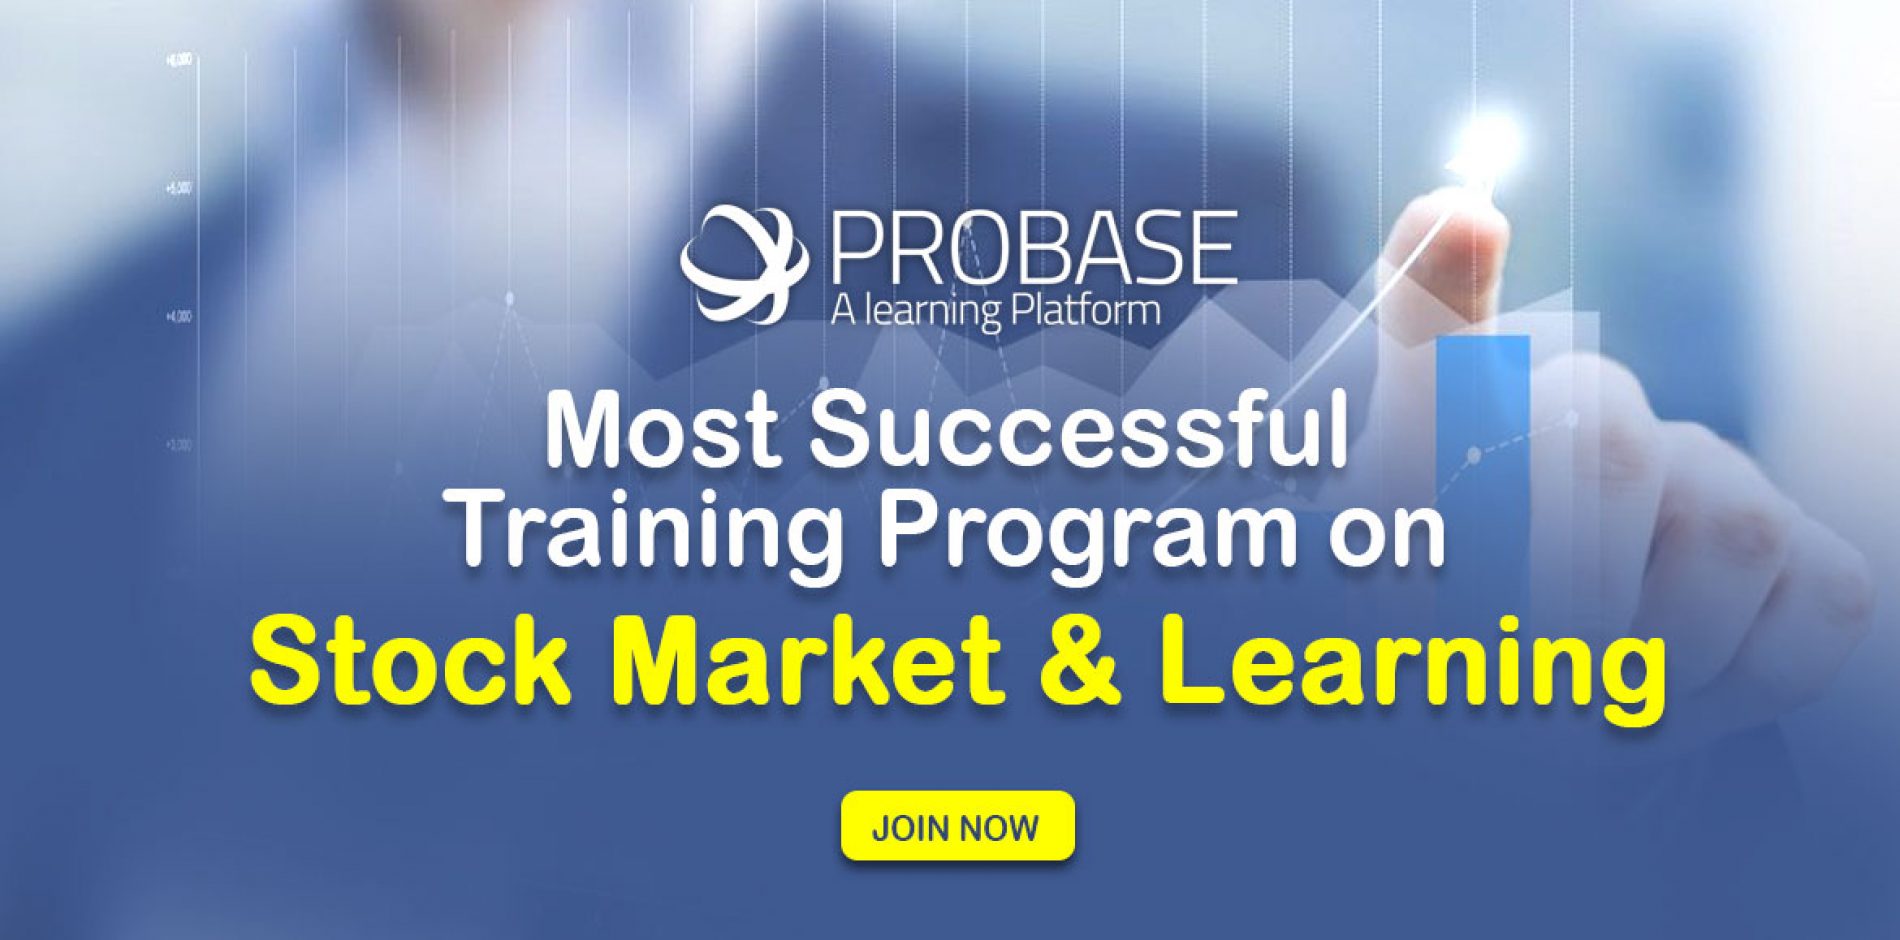 Join Probase